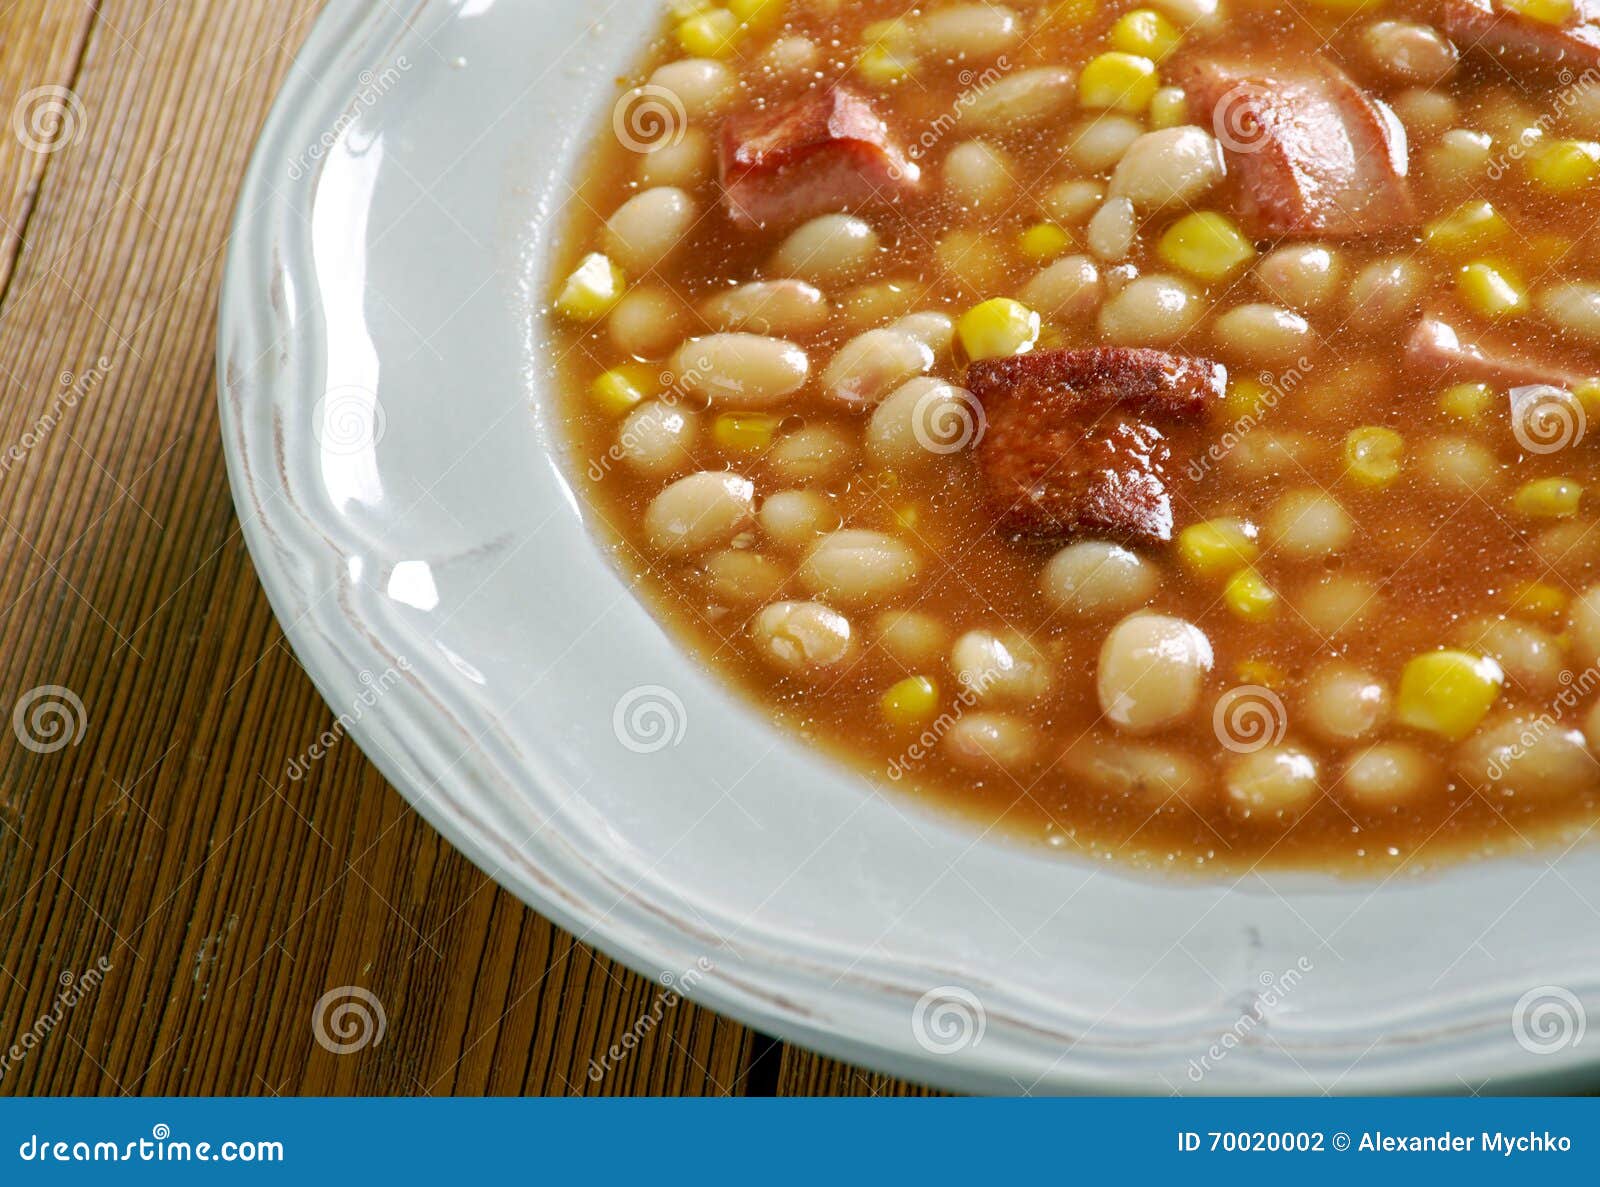 Tihove stock photo. Image of butter, beans, cuisine, health - 70020002